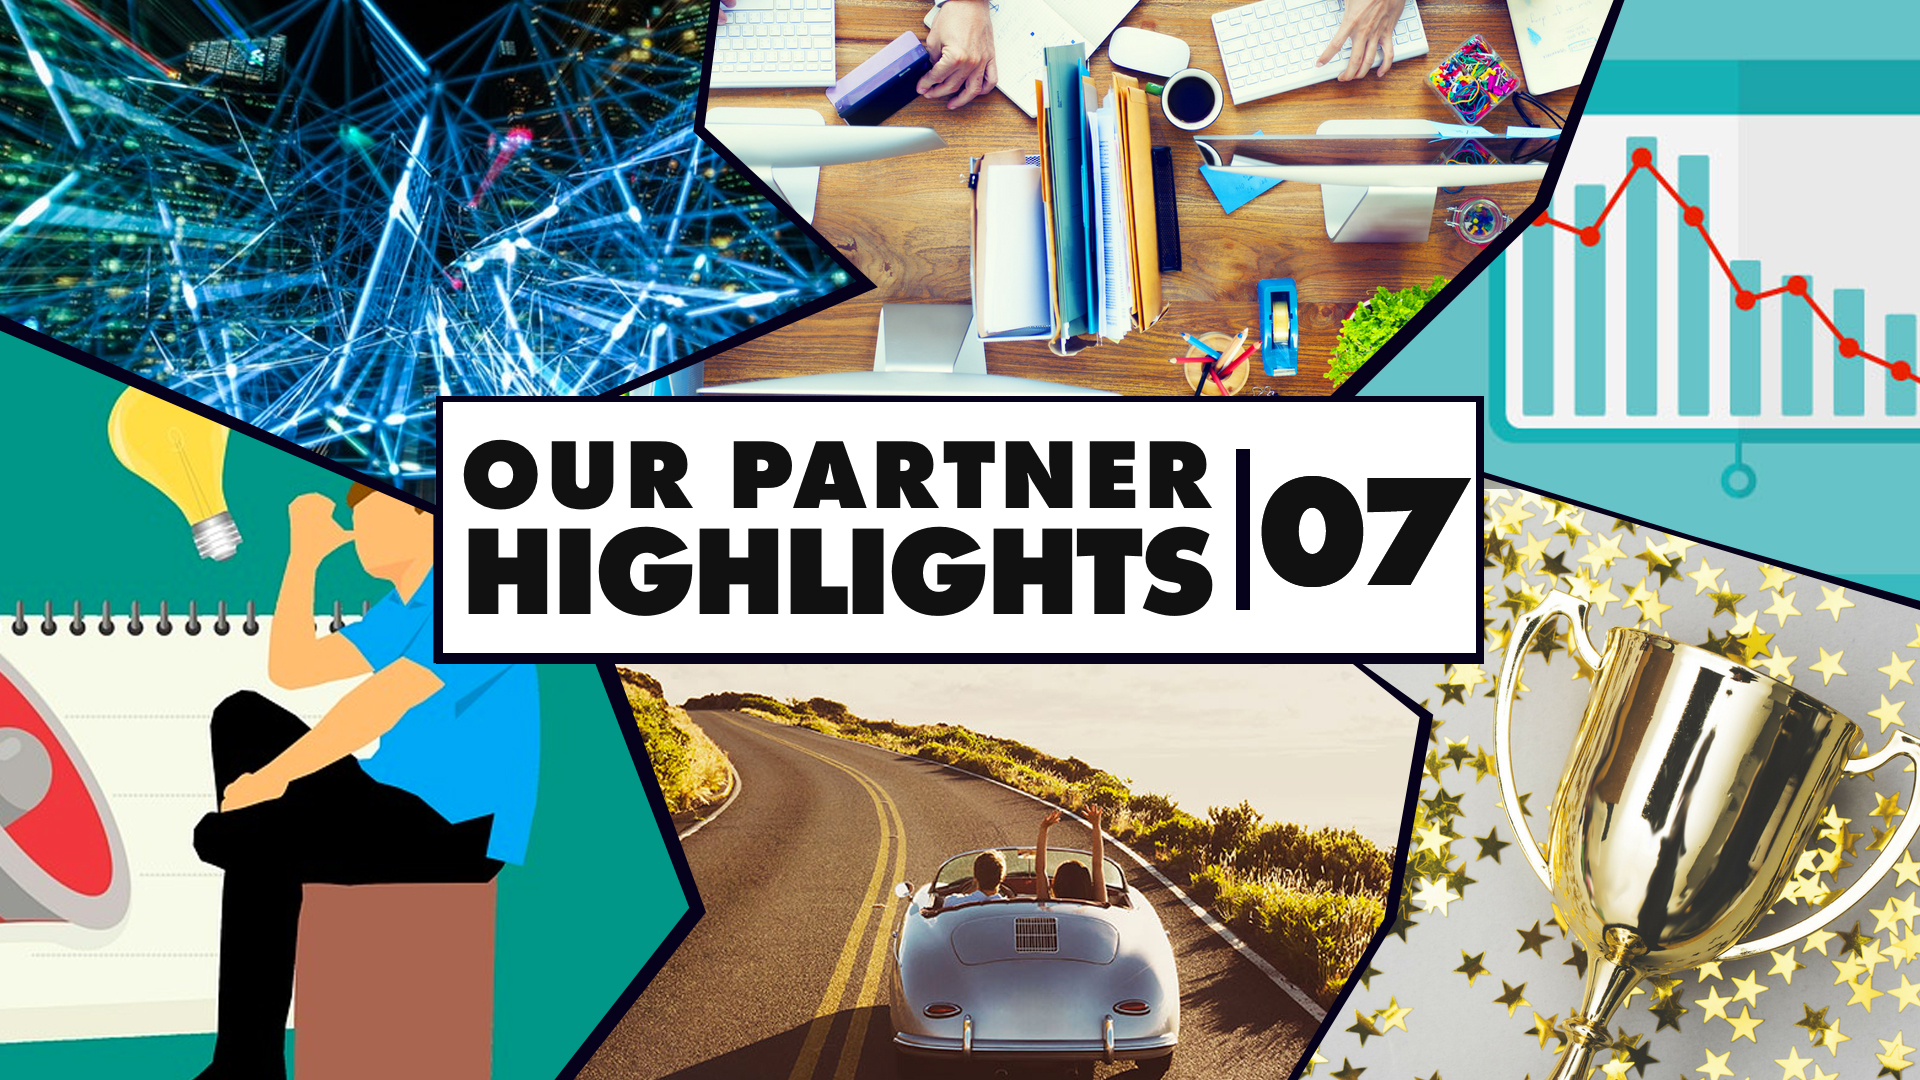 Our Partner Highlights | 07